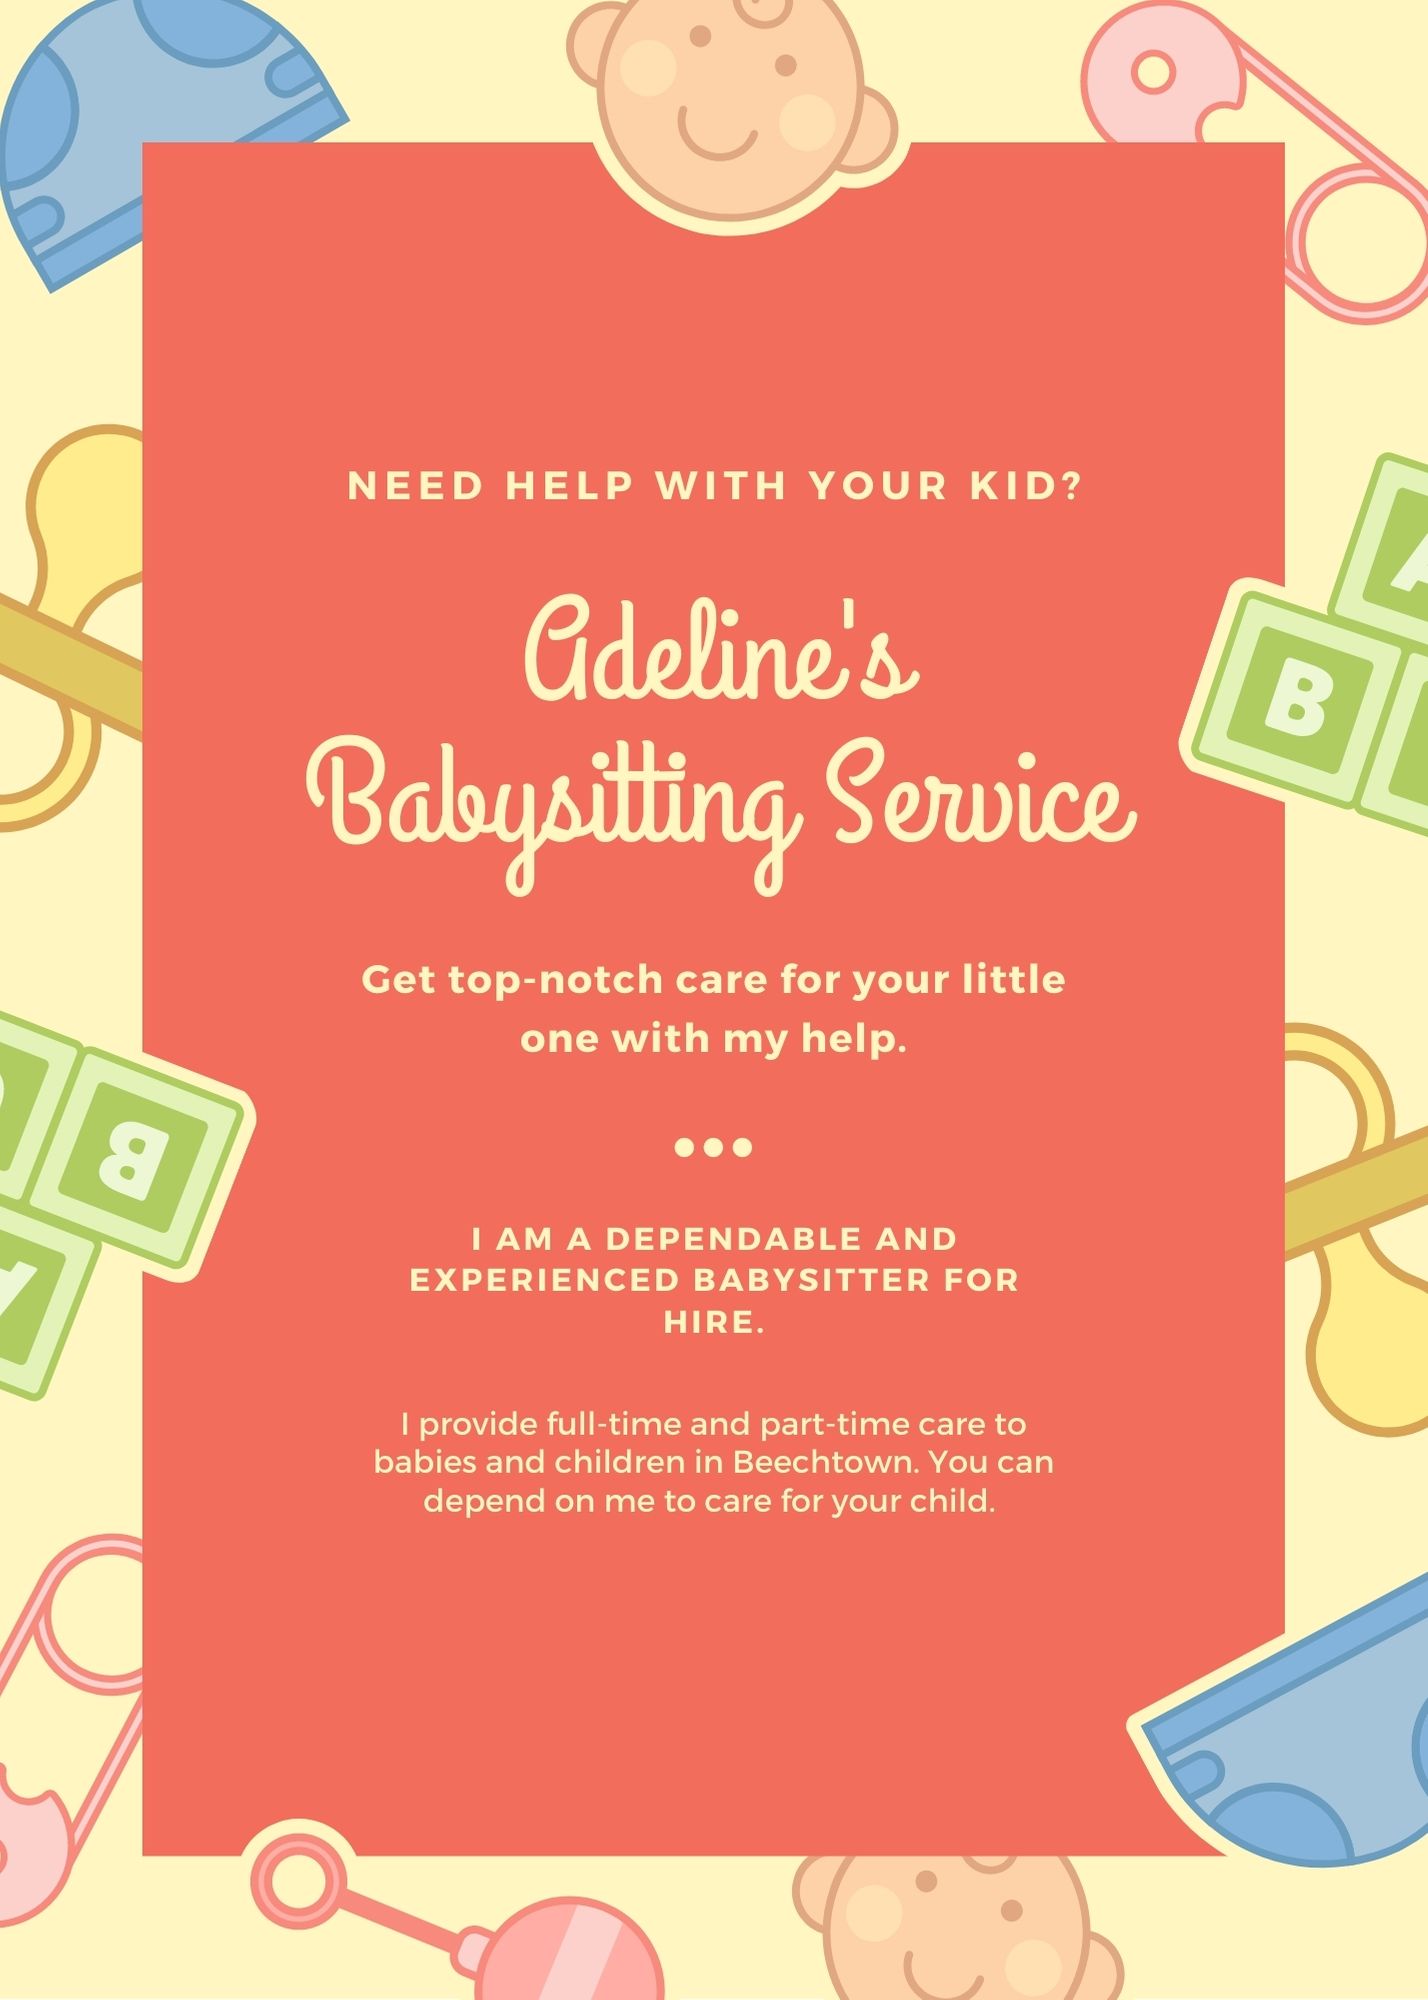 Small Business Ideas from Home: How to Start a Babysitting Service